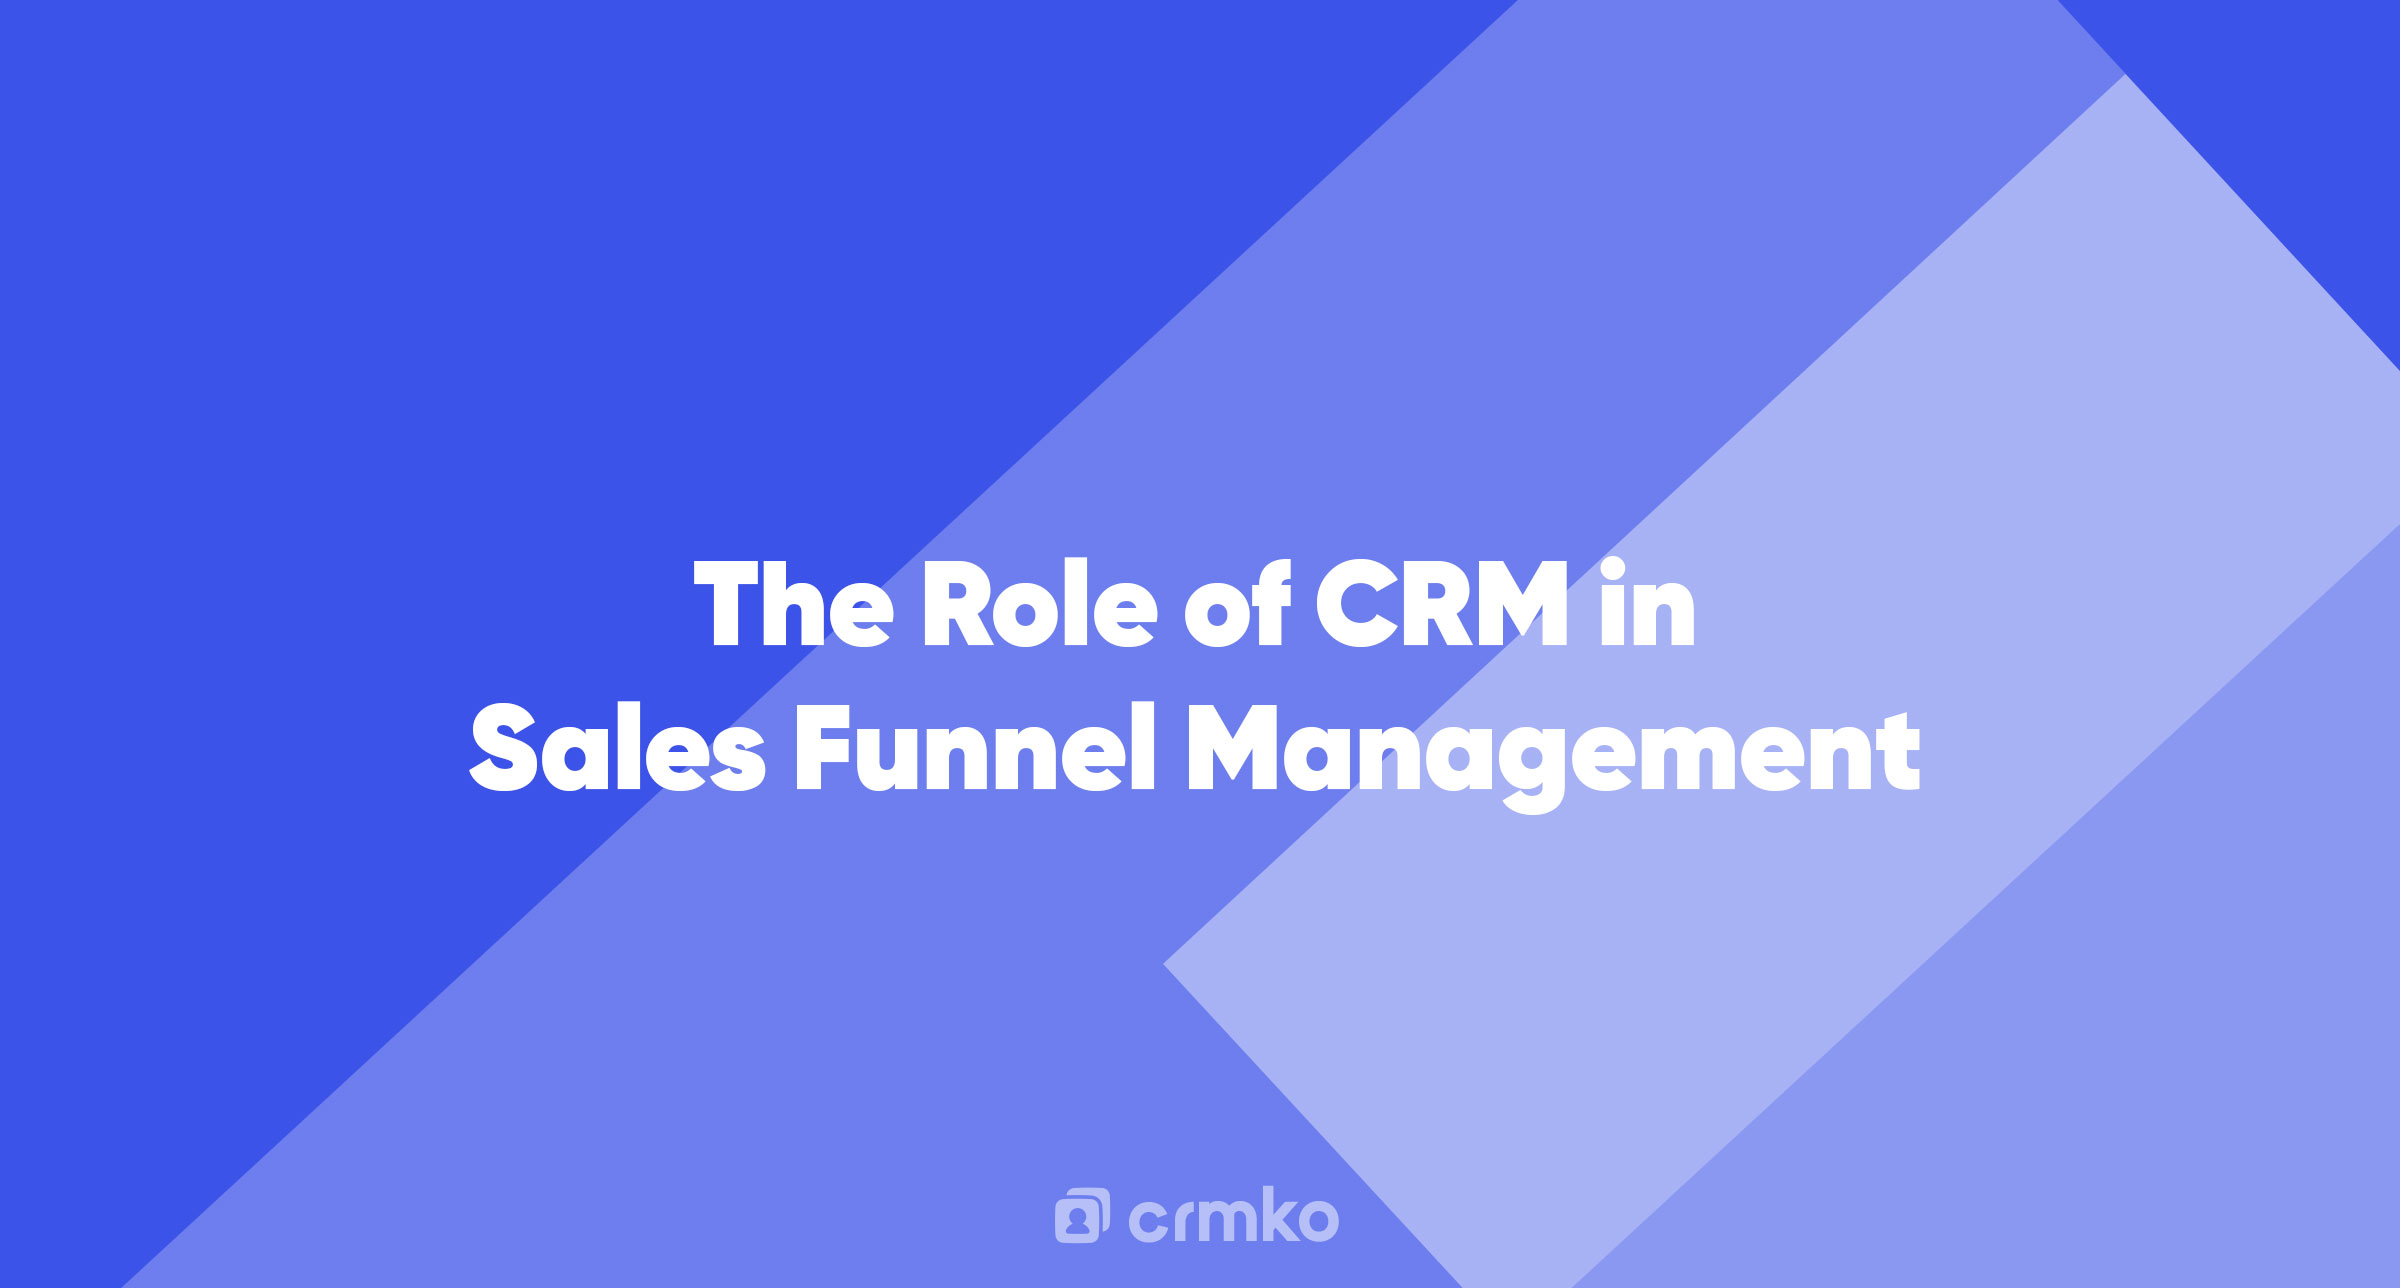 Article | The Role of CRM in Sales Funnel Management